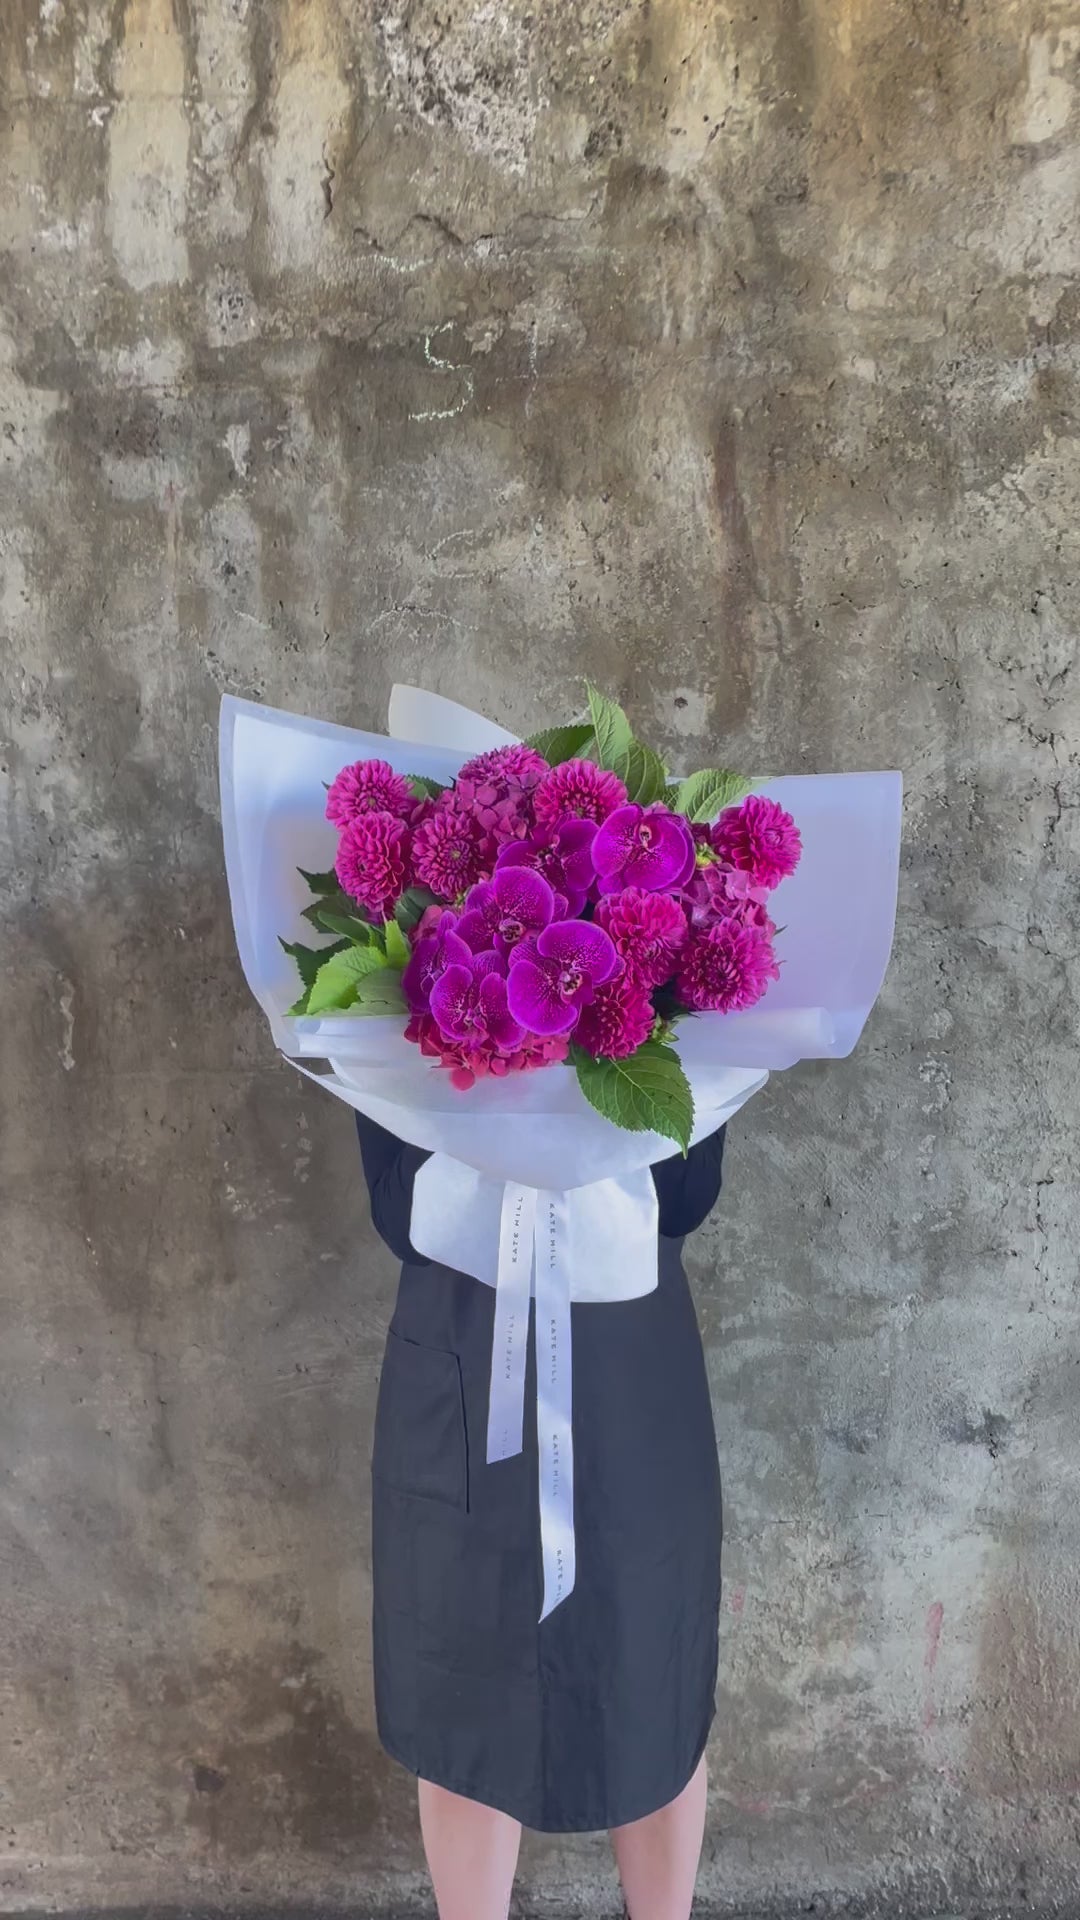 Video of the magenta bouquet, showing through the details of the bouquet.